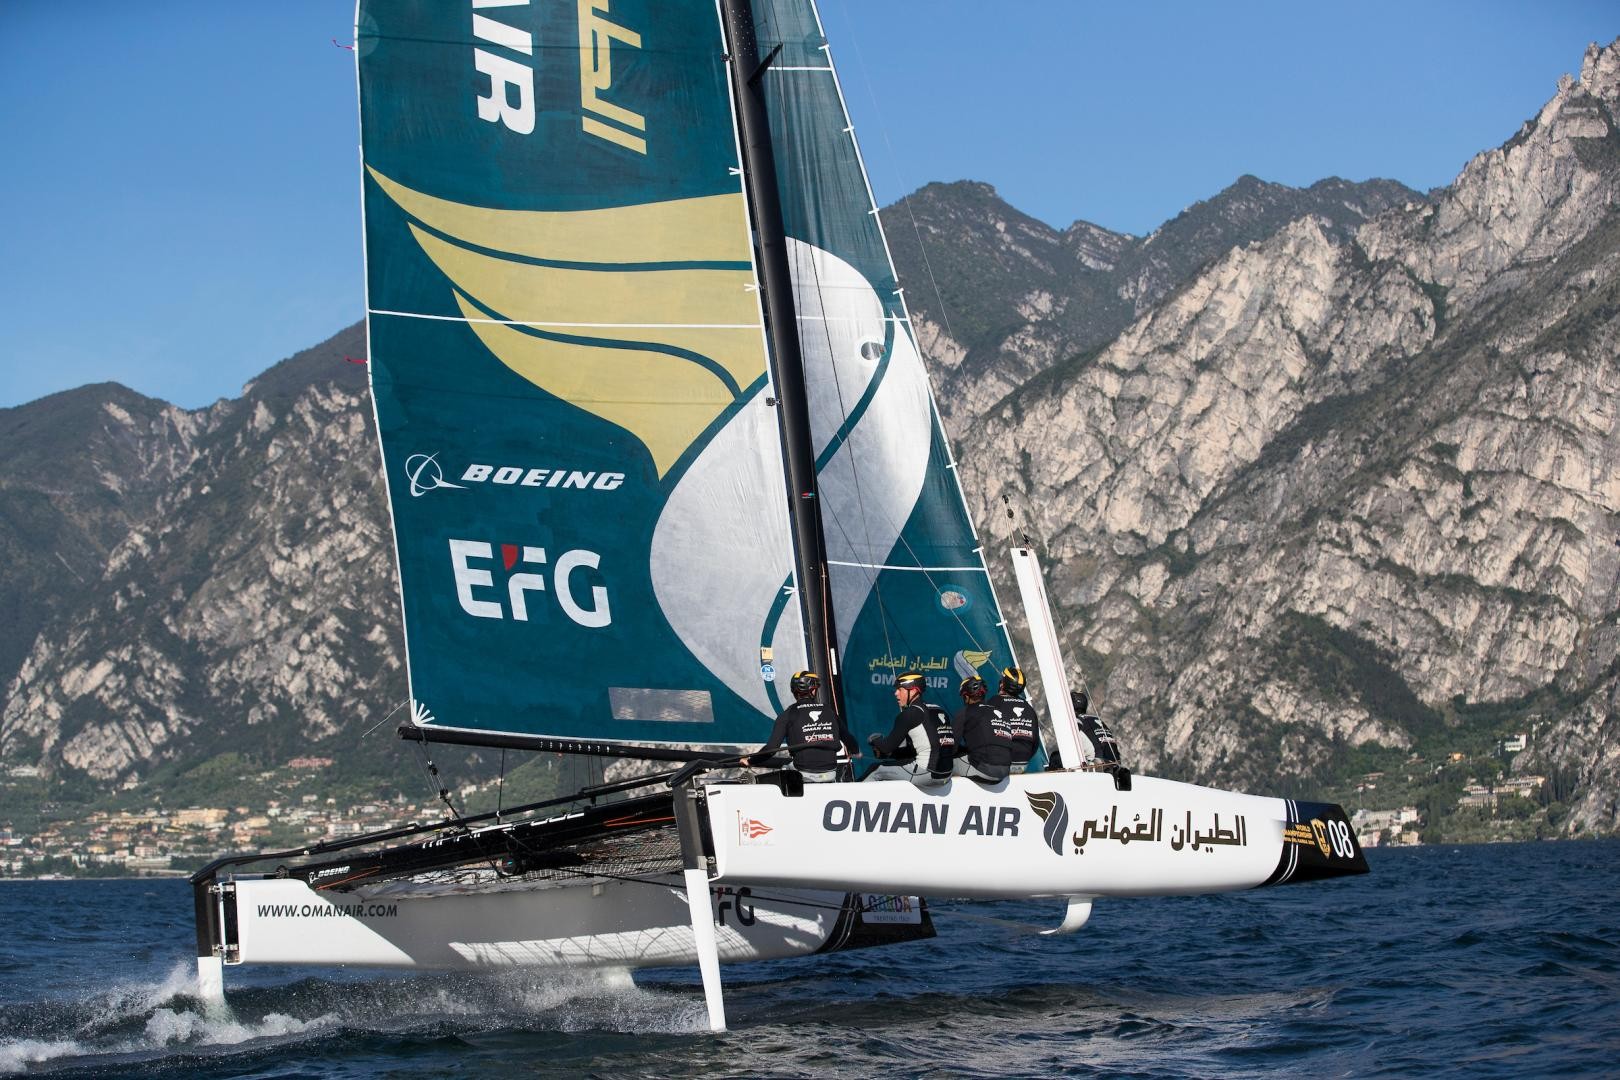 eam Oman Air supported by EFG Private Bank Monaco joins the GC32 Racing Tour with Adam Minoprio on the helm. Photo: Lloyd Images